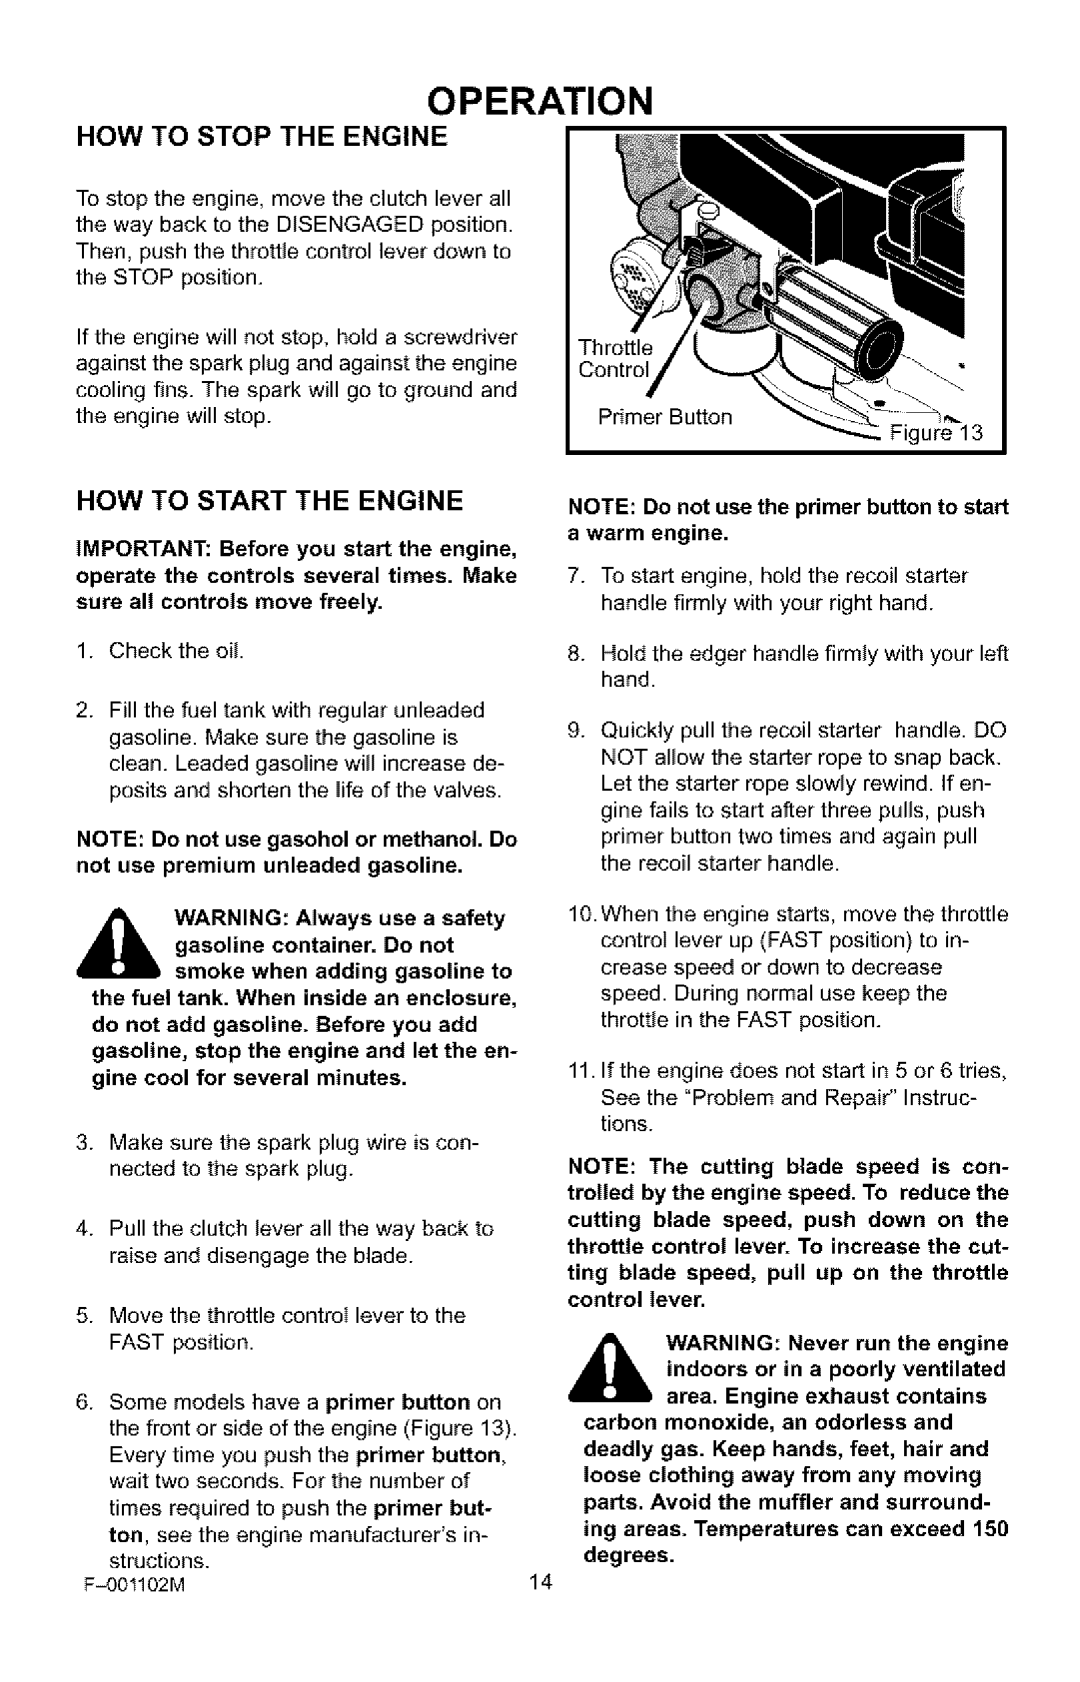 Craftsman 536.772301 manual Operation, How To Stop The Engine, How To Start The Engine 